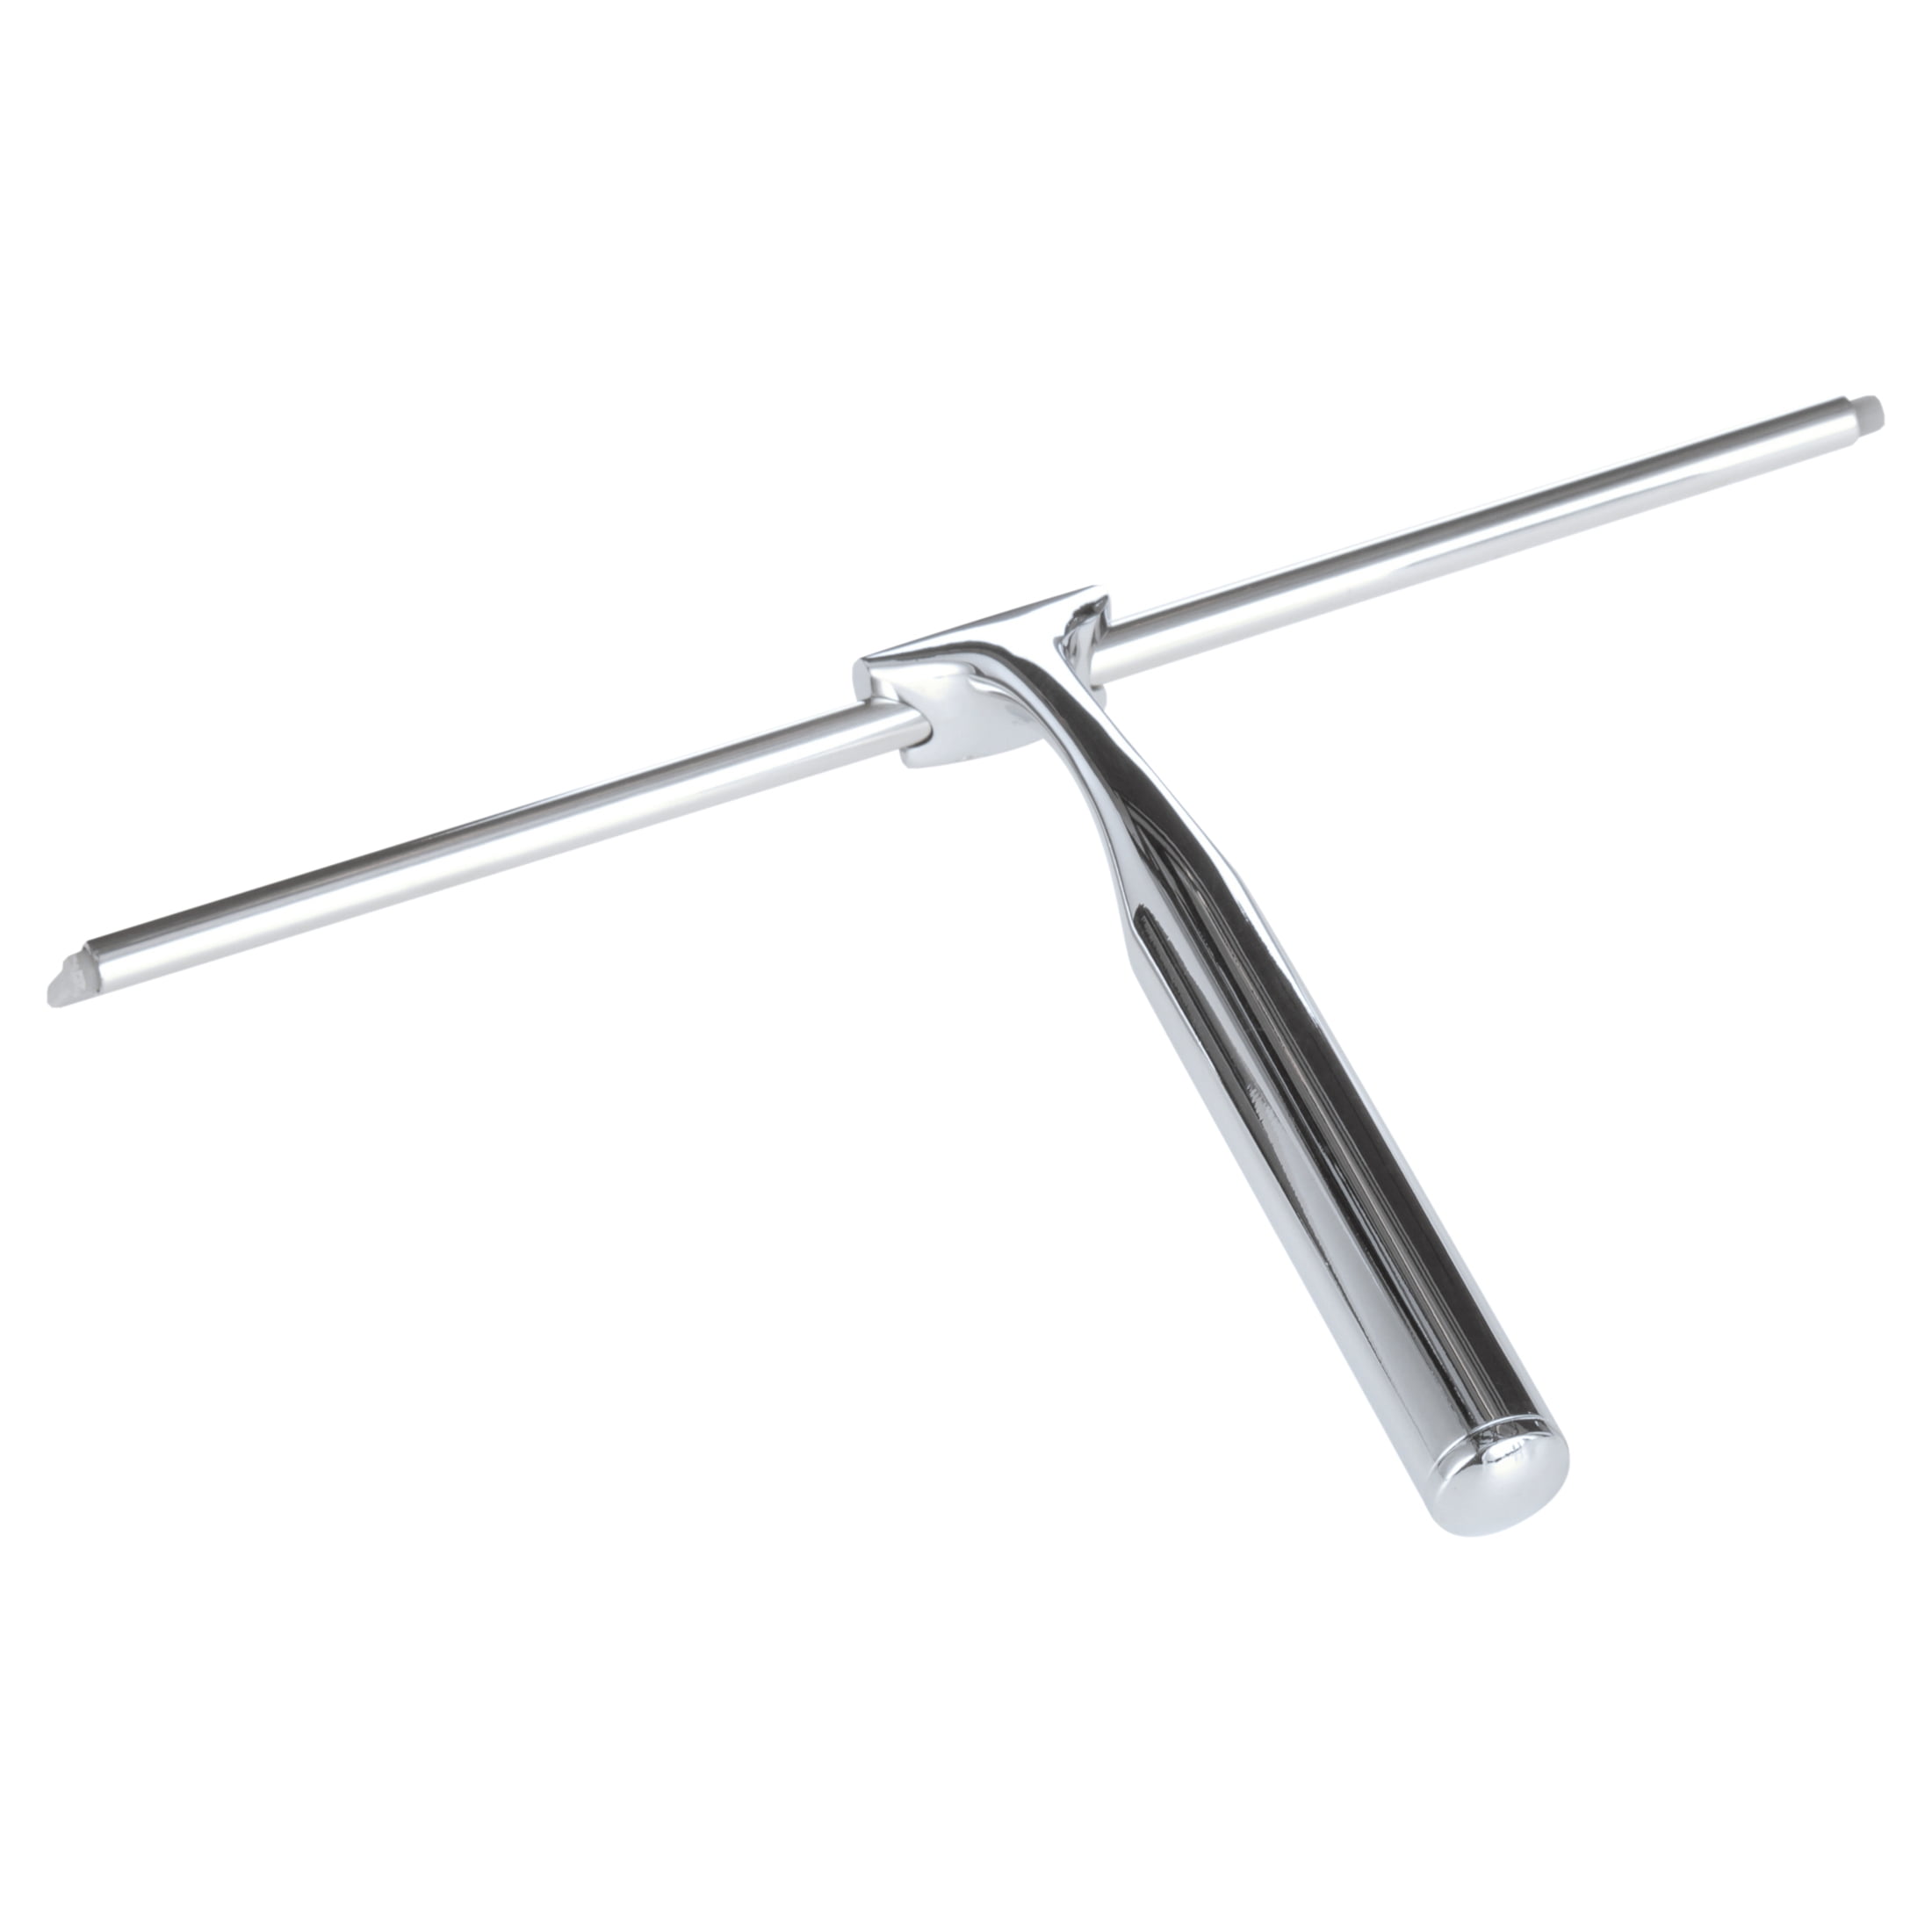 RNAB0B9JB5XMF nukee stainless steel window squeegee with shower